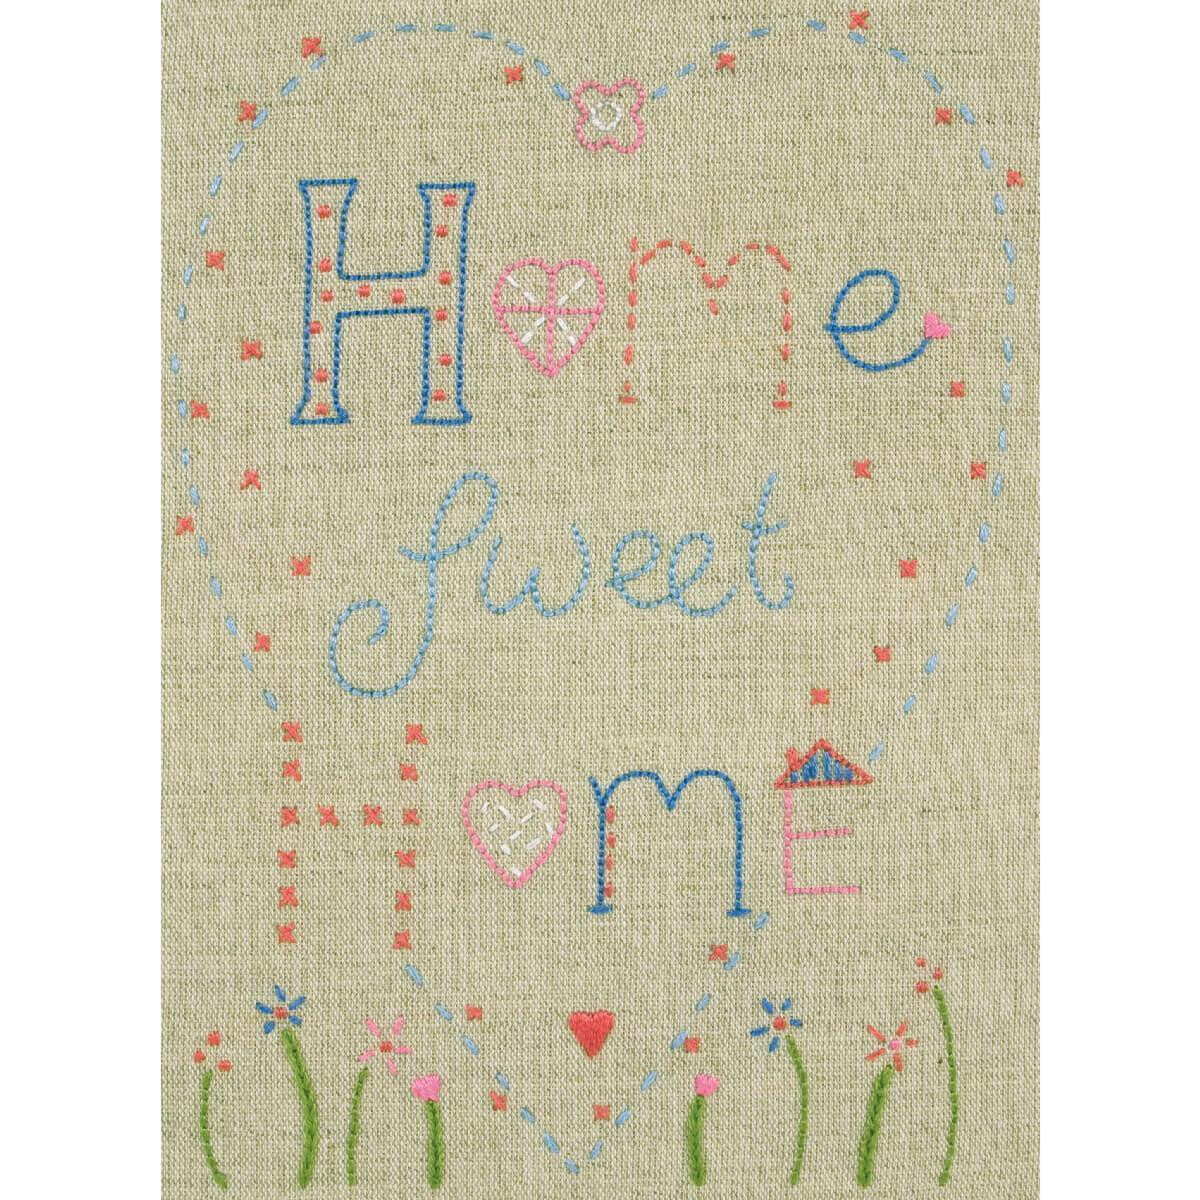 Anchor stamped freestyle stitch kit "Home Sweet Home...